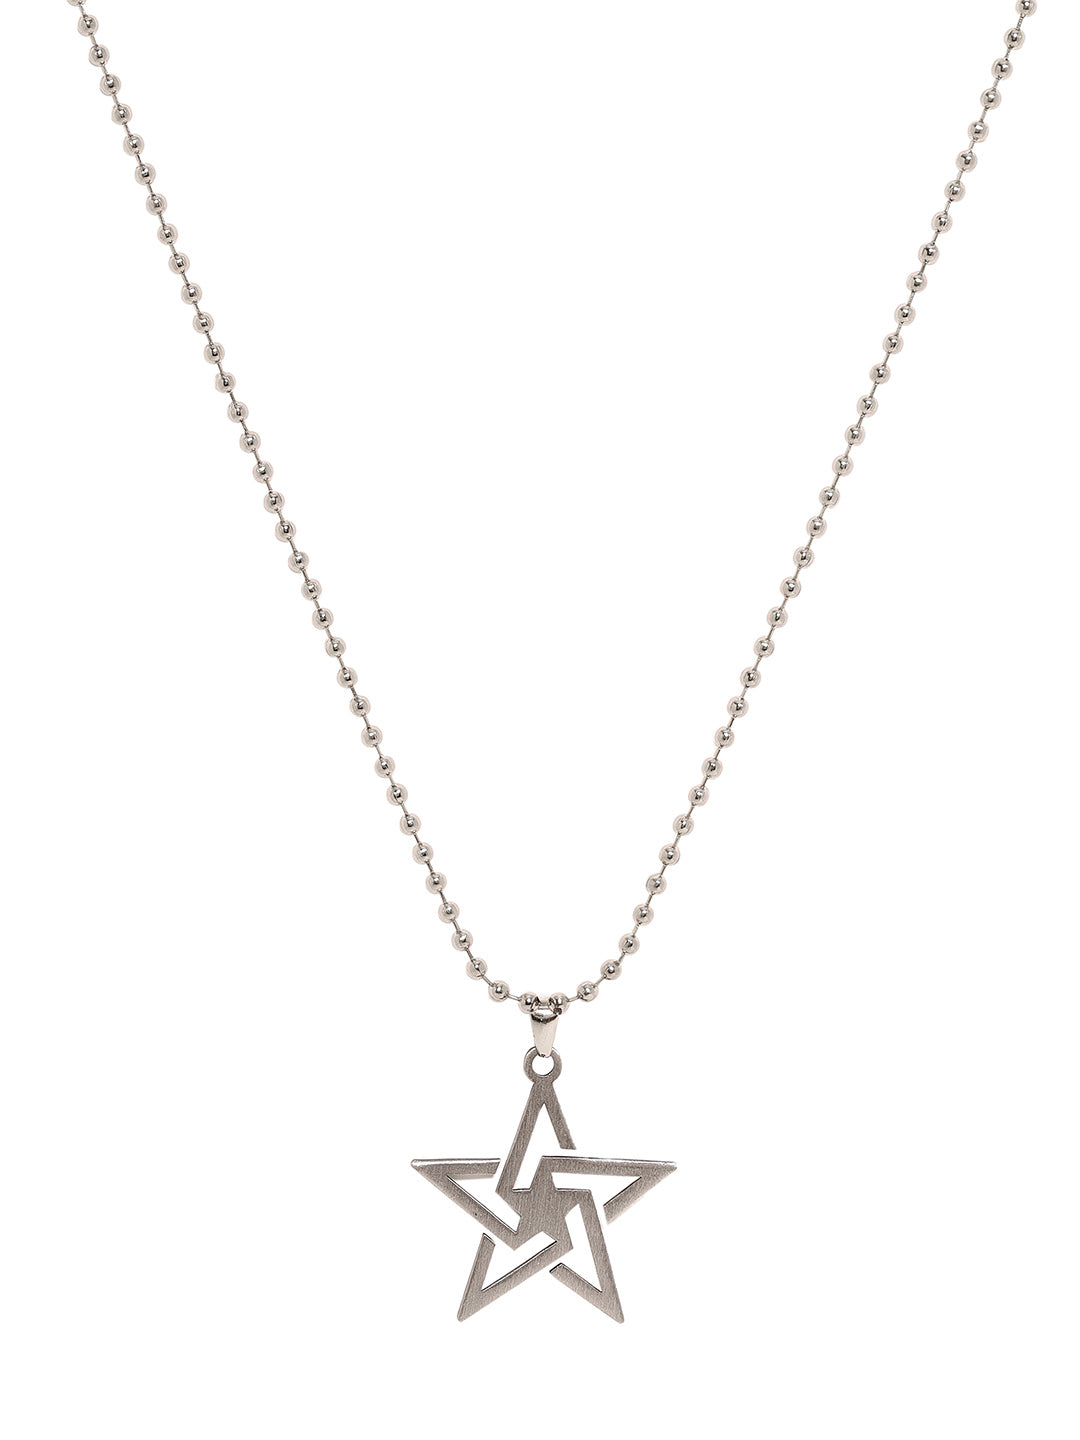 Exquisite Silver-Plated Men's Chain with Striking Start Pendant